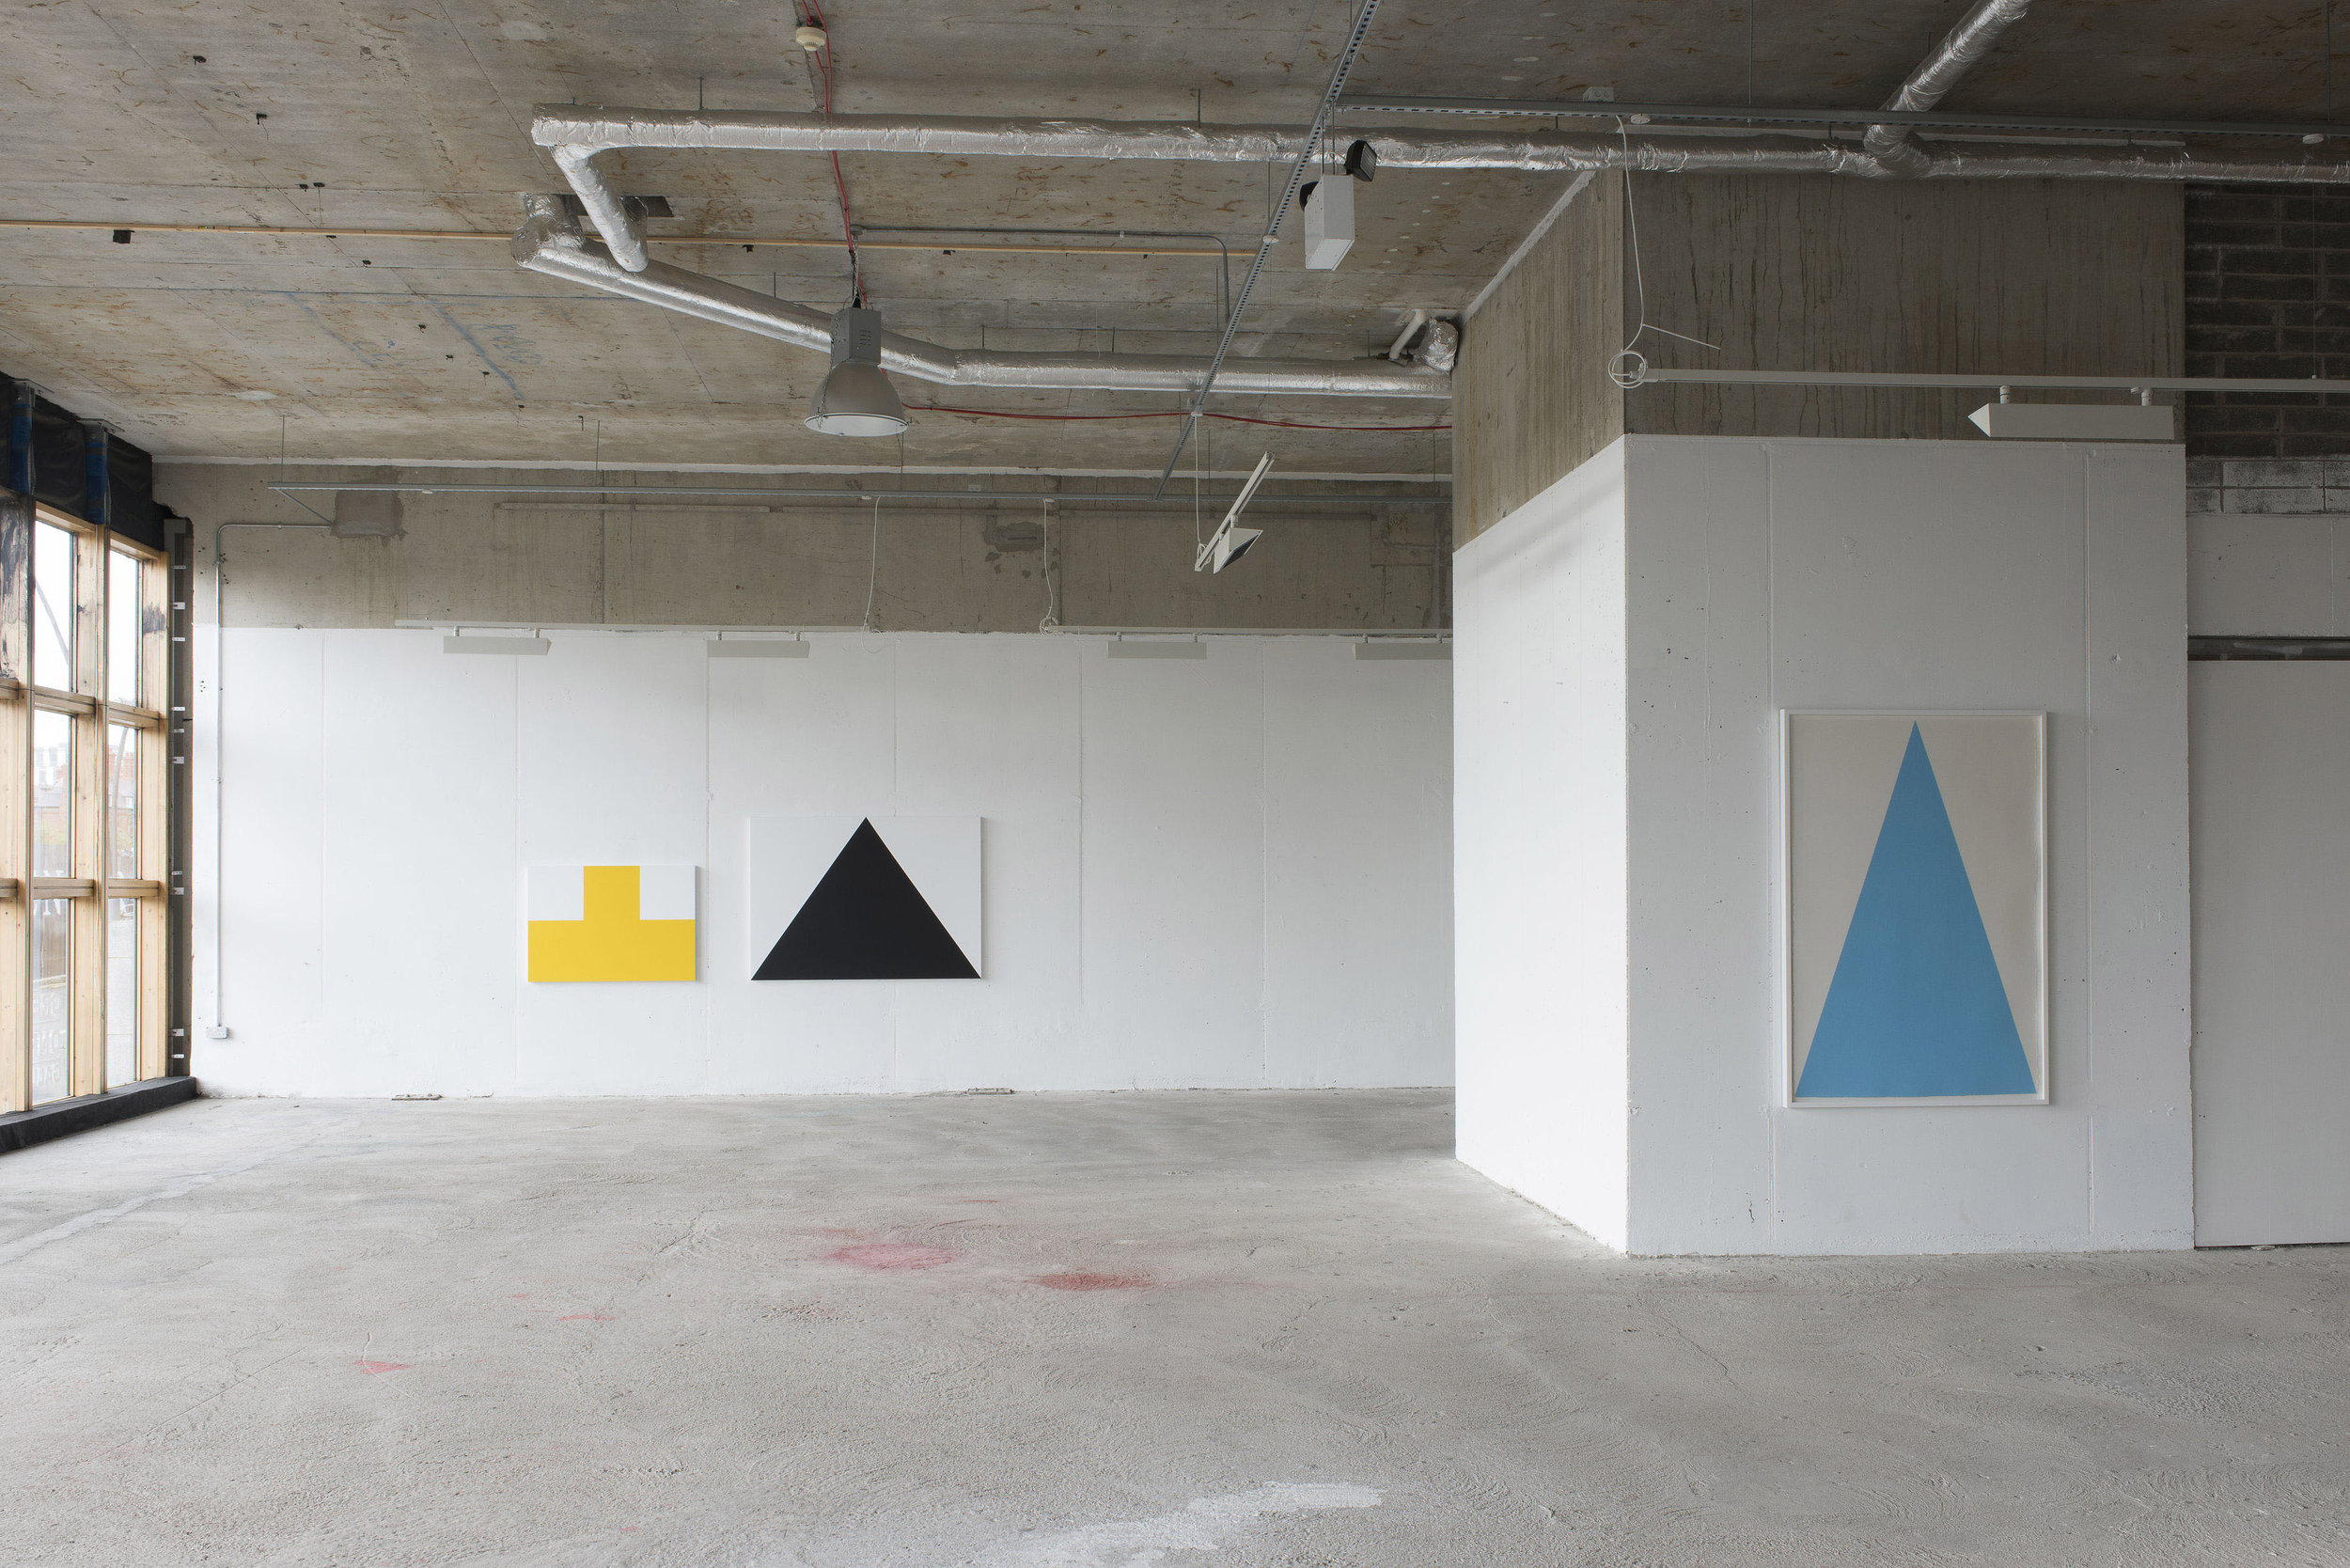 Installation view Green On Red Gallery, Dublin, 2016, Back wall: Yellow, Marine Both paintings  Acrylic on aluminium. Wall on right: Light Sky, Chalk pastel on paper